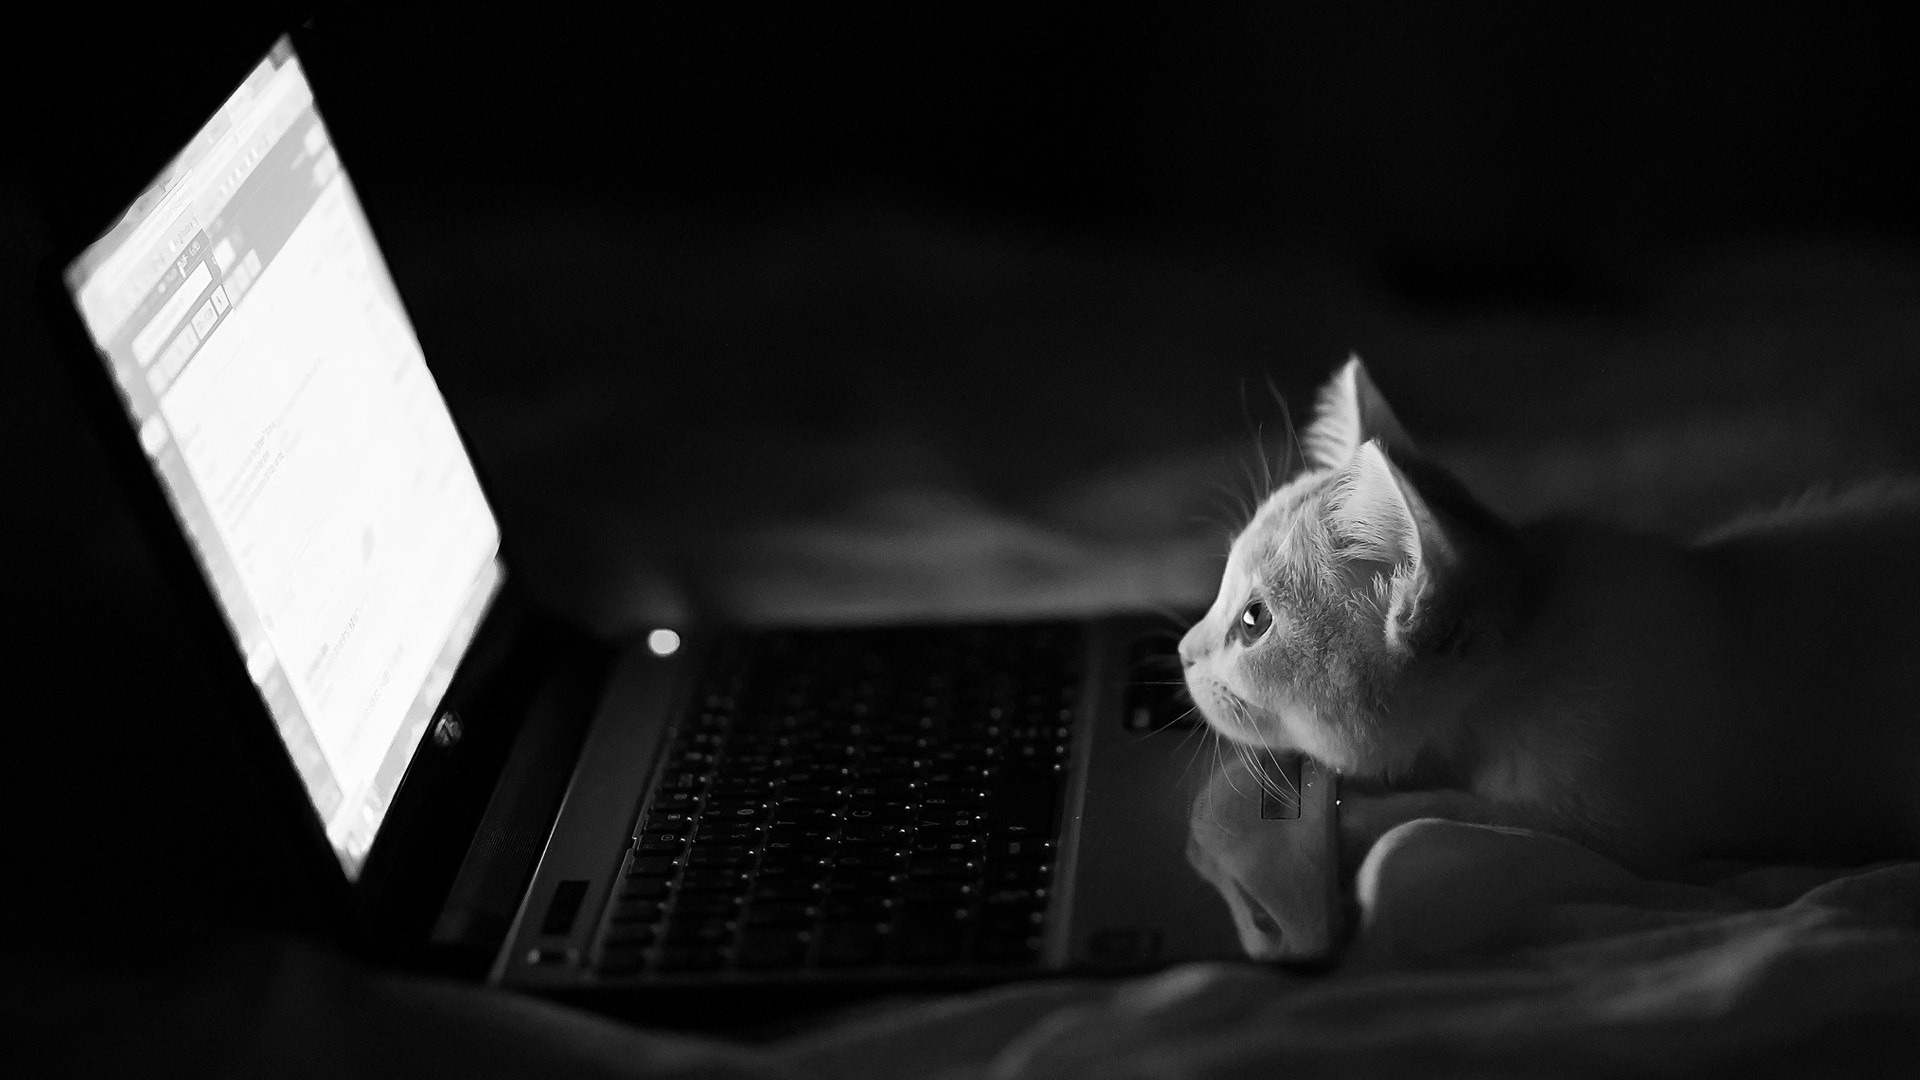 The hacking Cat for 1920 x 1080 HDTV 1080p resolution